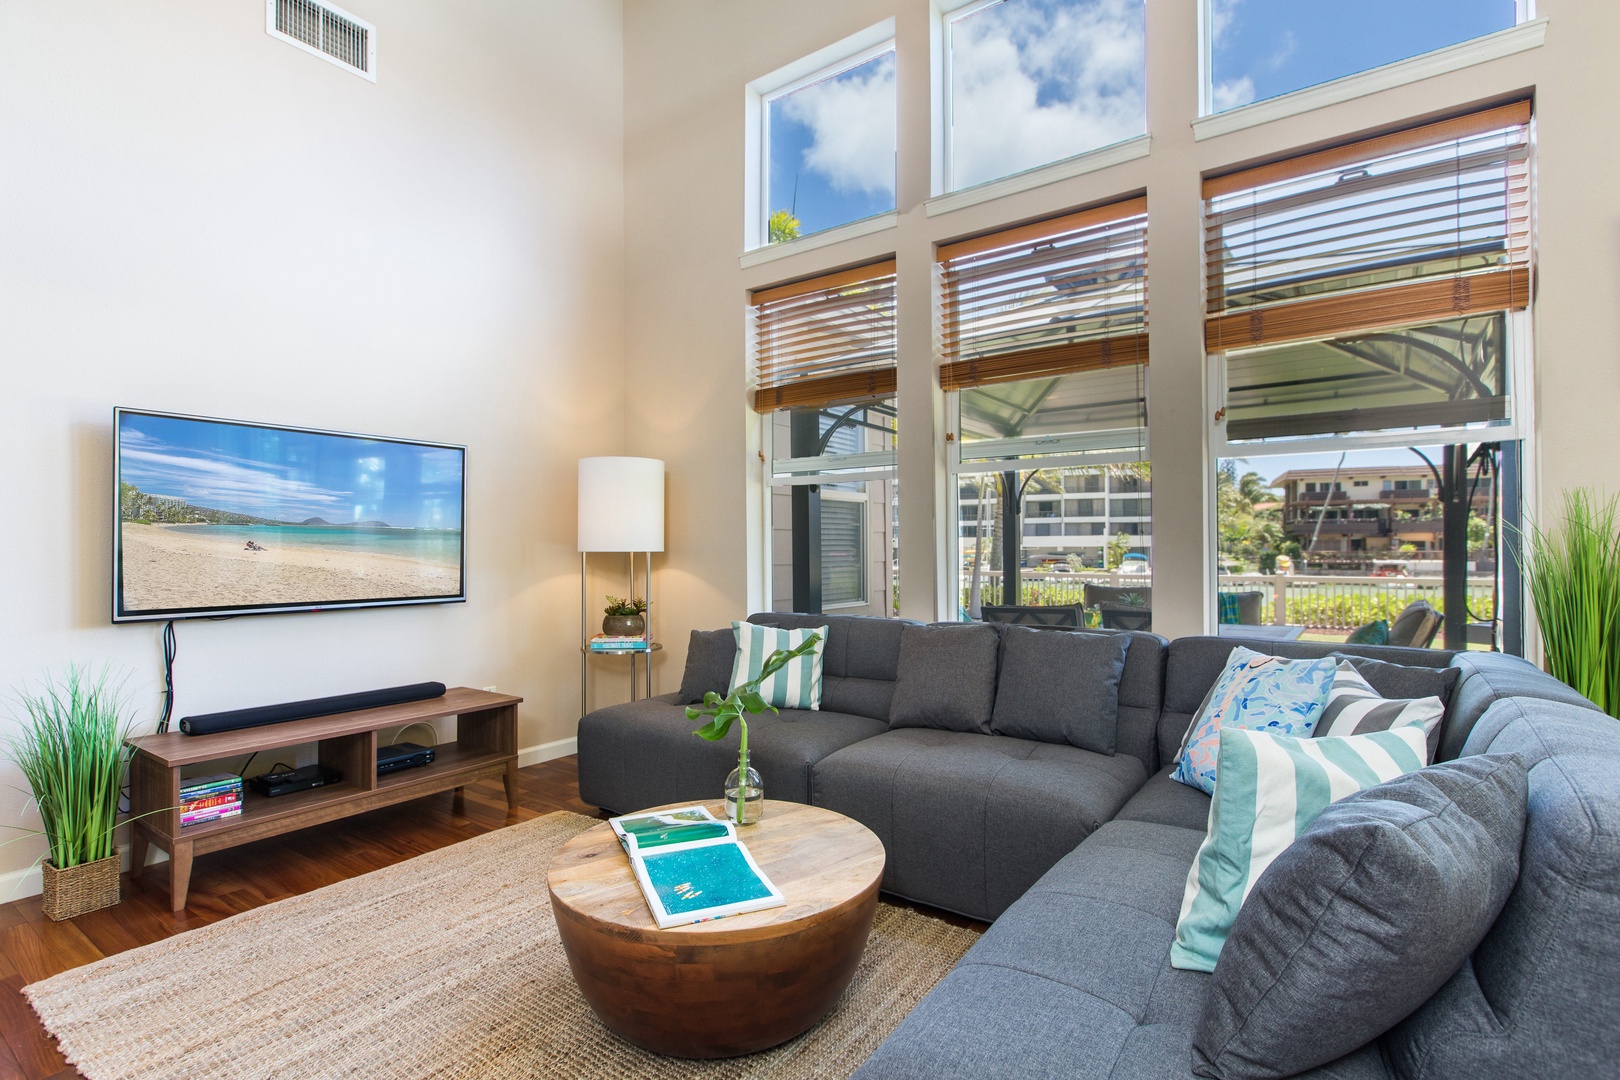 Honolulu Vacation Rentals, Ohana Kai - Kick back and relax at Ohana Kai, where you have a large, family-size couch, beautiful wood flooring, full air conditioning, and of course wireless internet.